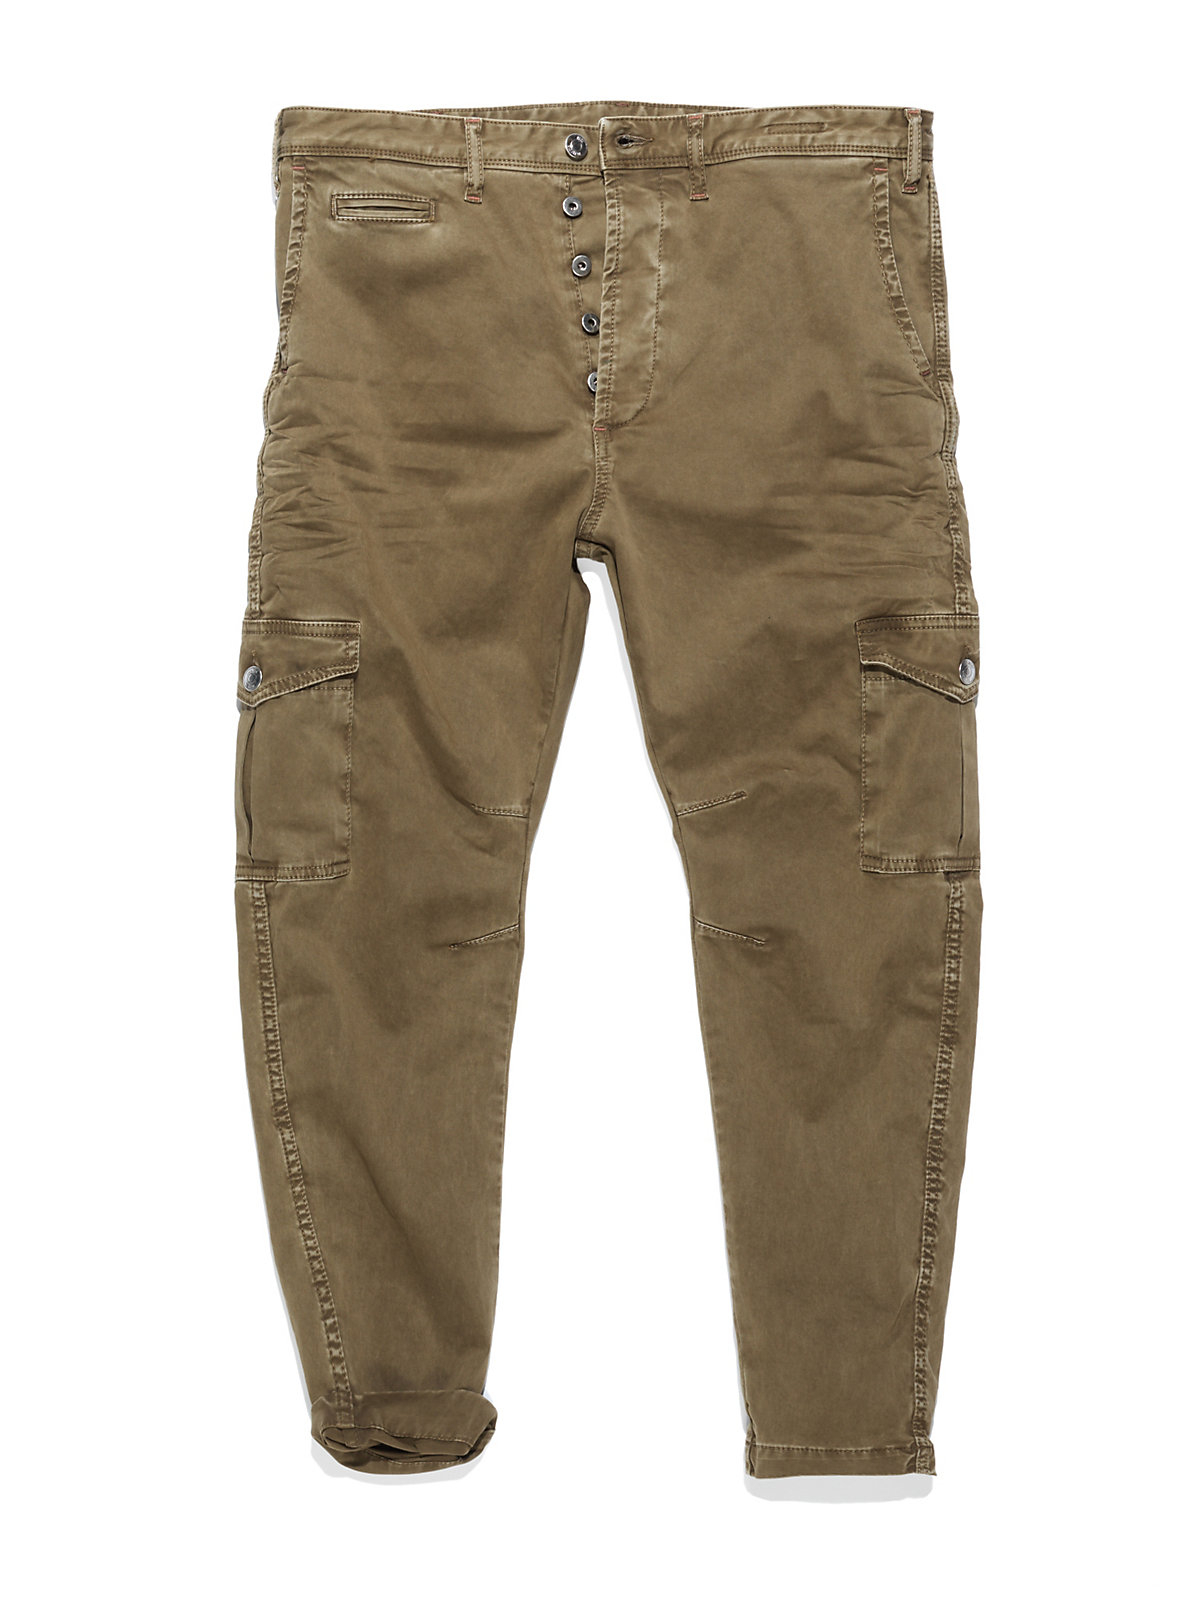 Patrizia pepe Peg Leg Trousers With Cargo Pockets In Stretch Cotton ...